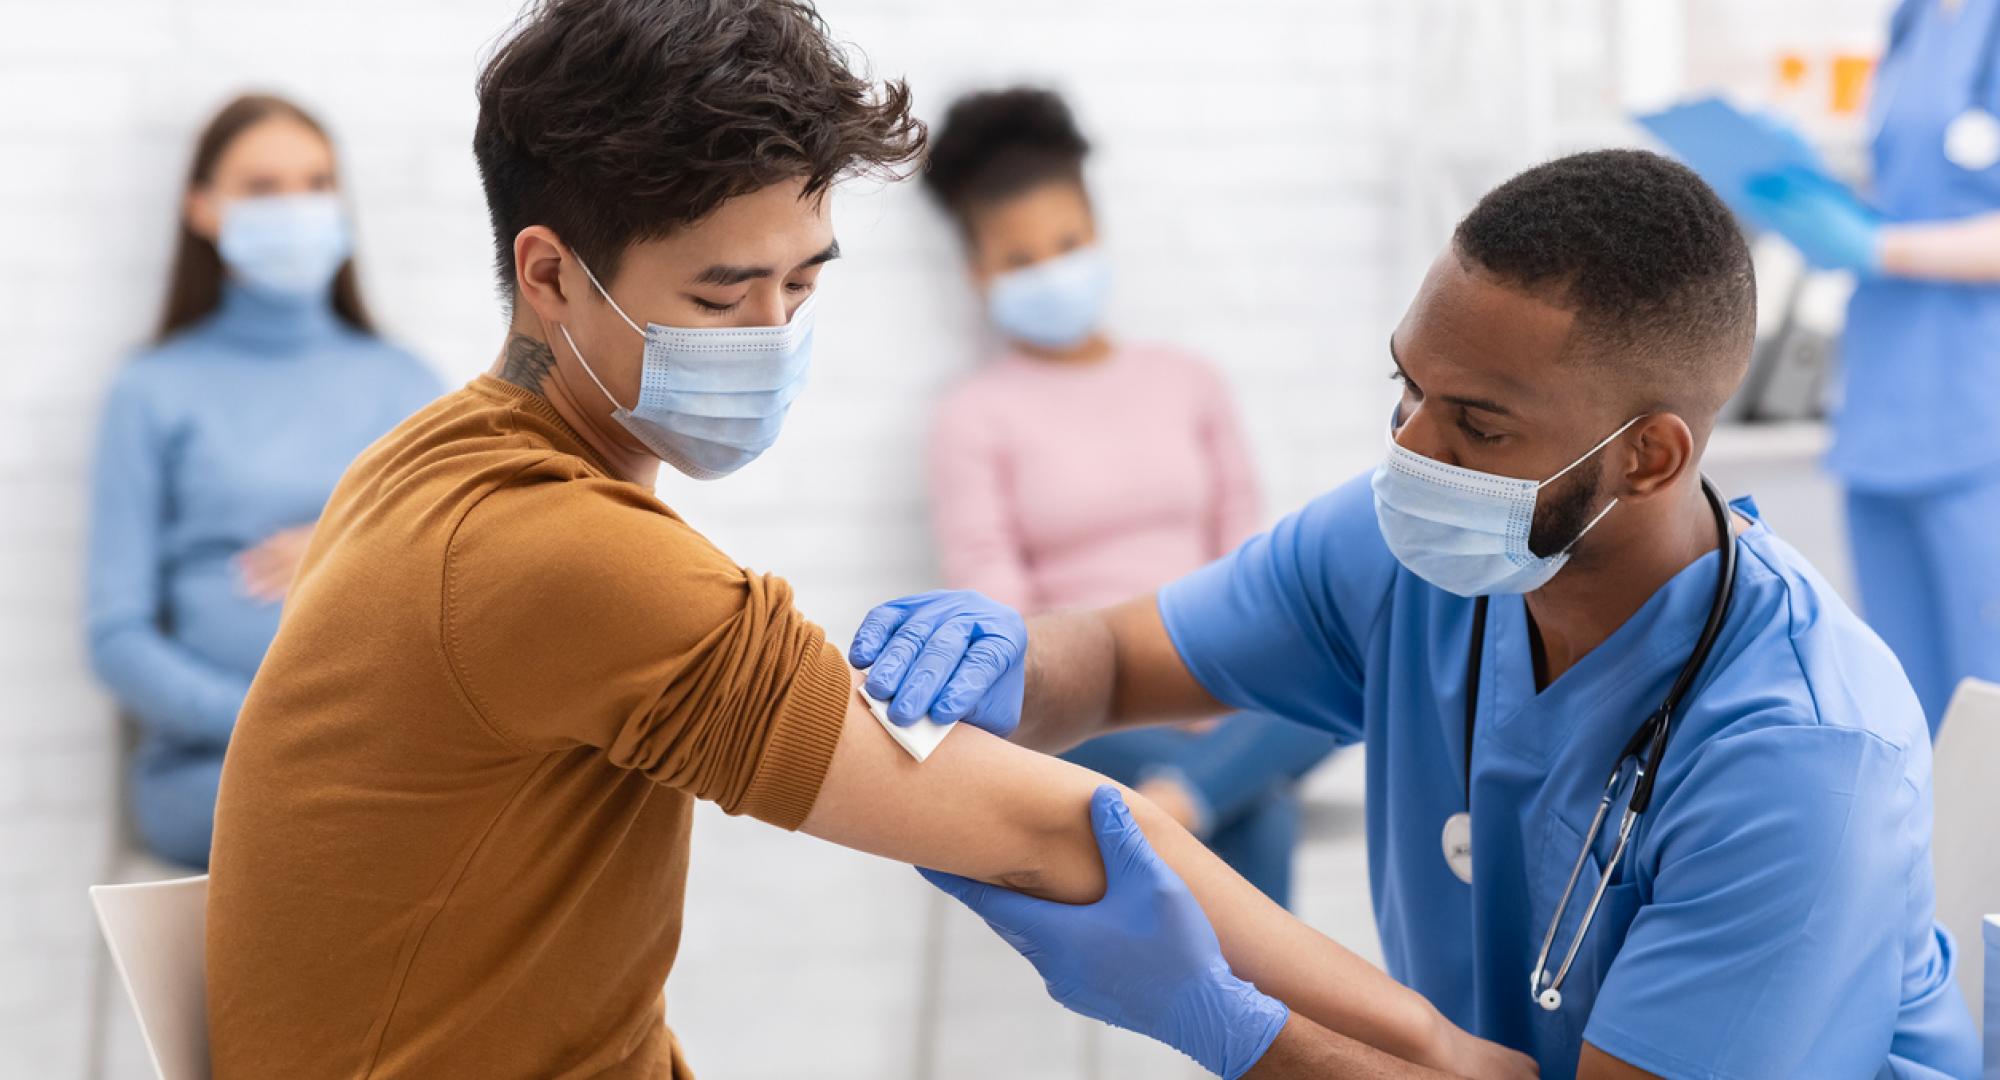 BAME man receives vaccine from nurse.